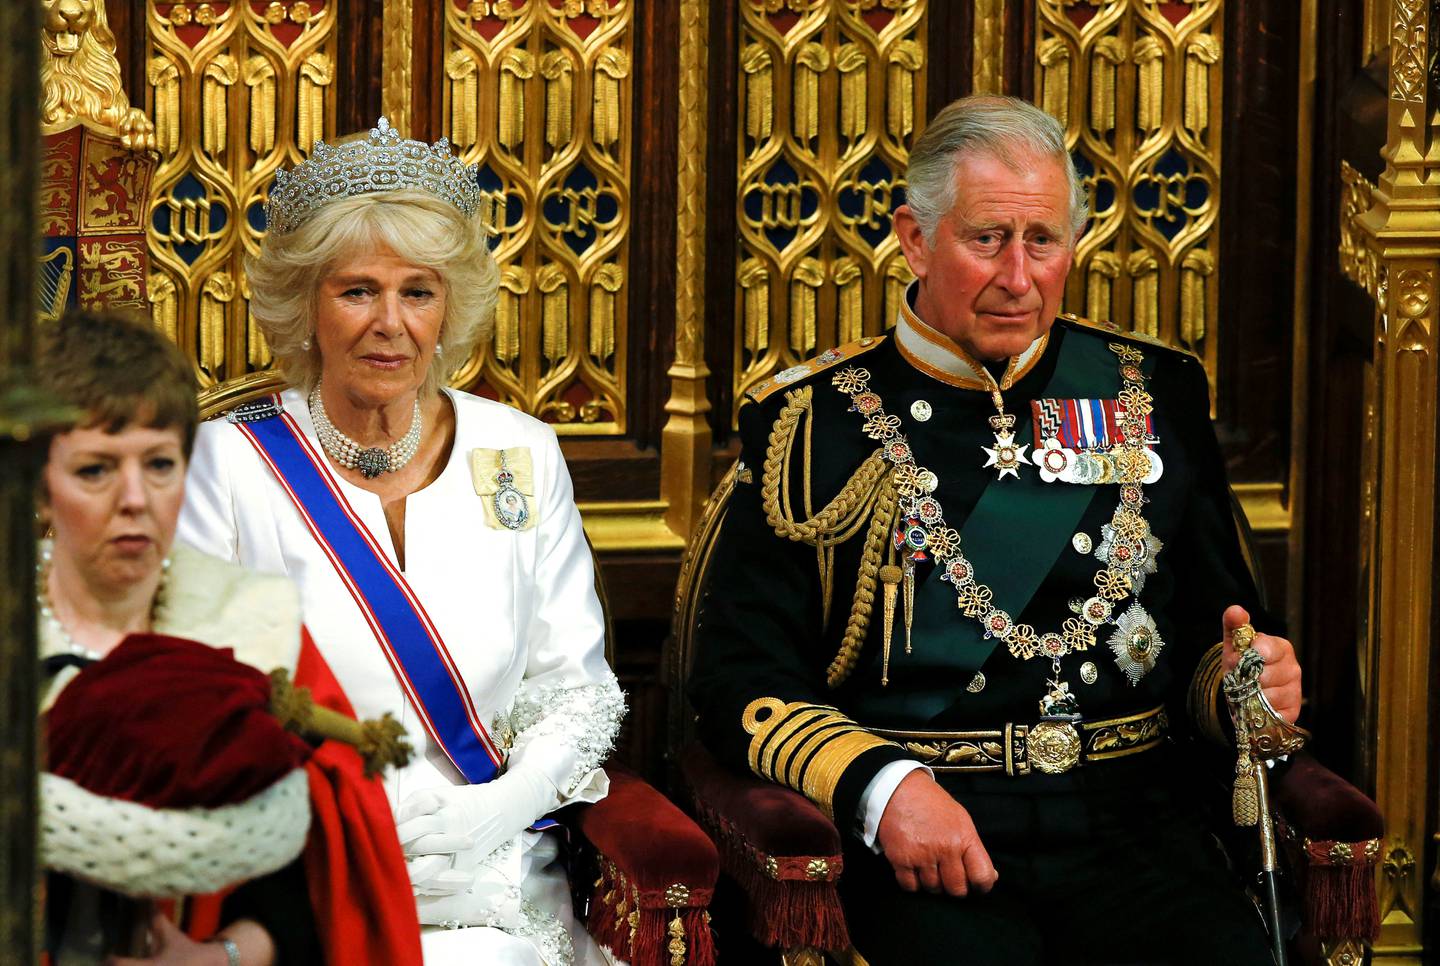 Prince Charles with his wife Camilla, Duchess of Cornwall who will now become Queen Consort when he accedes the throne. Reuters.